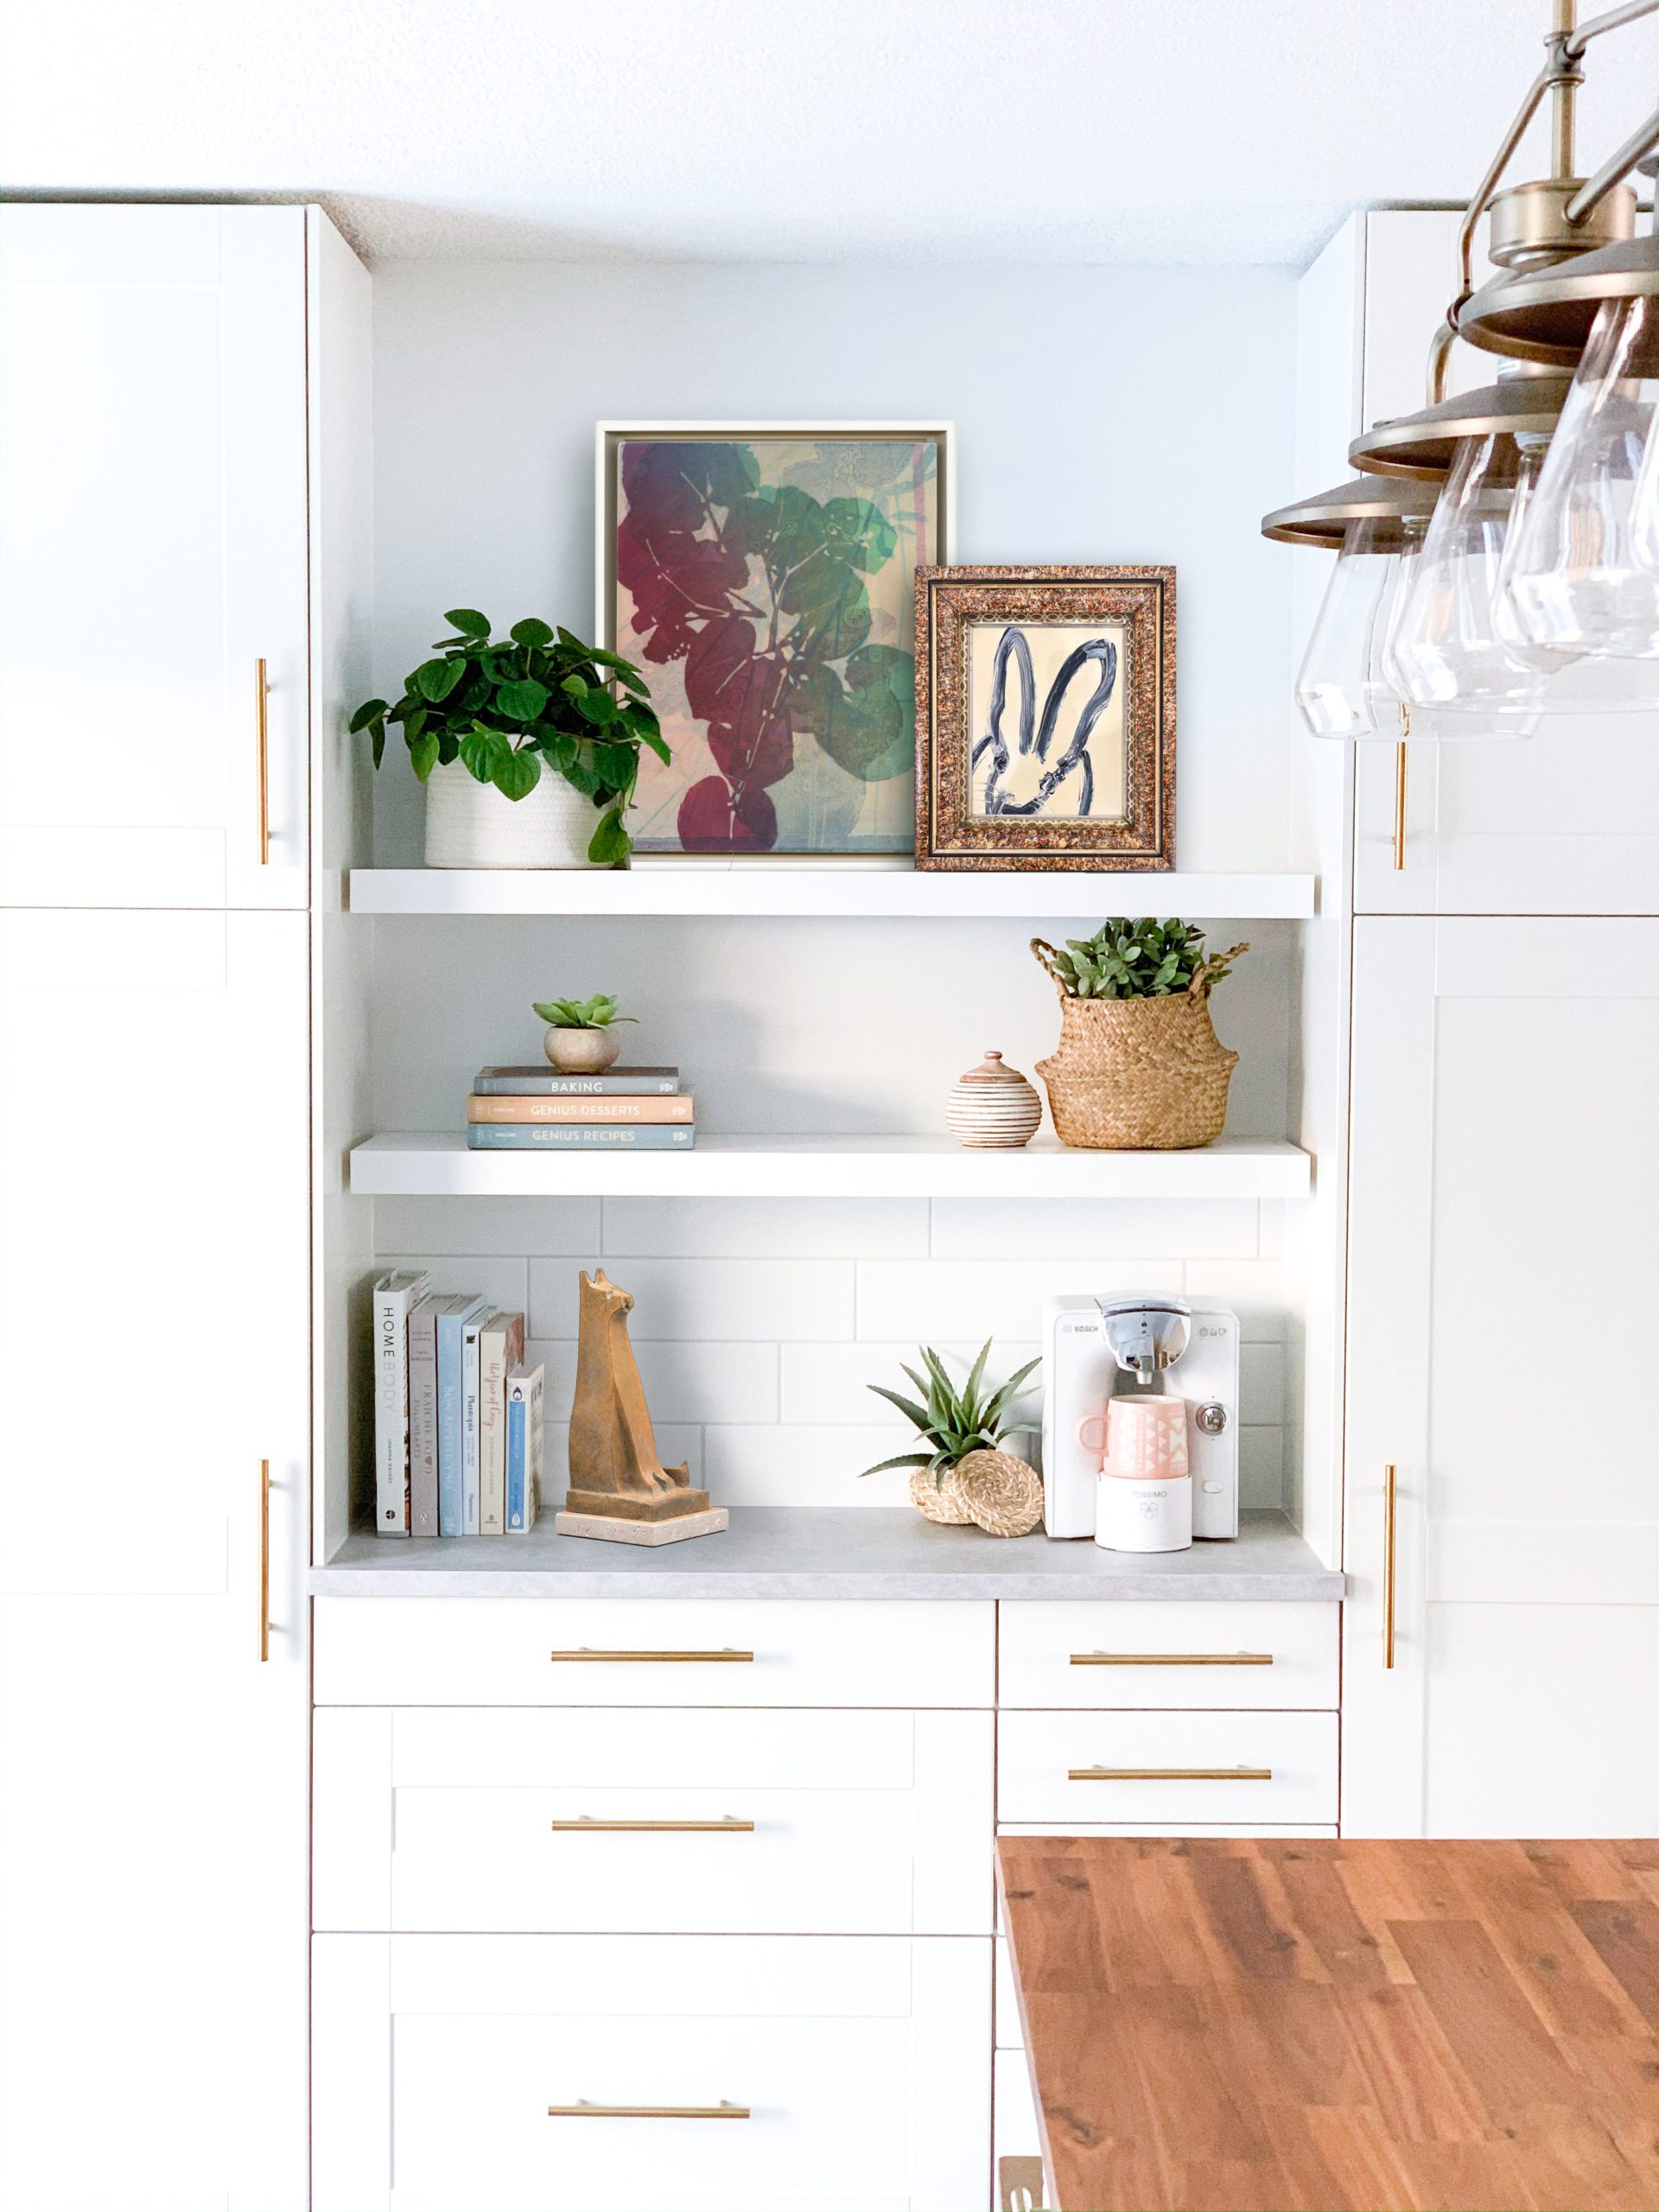 Picture This: Curating The Best Shelfie